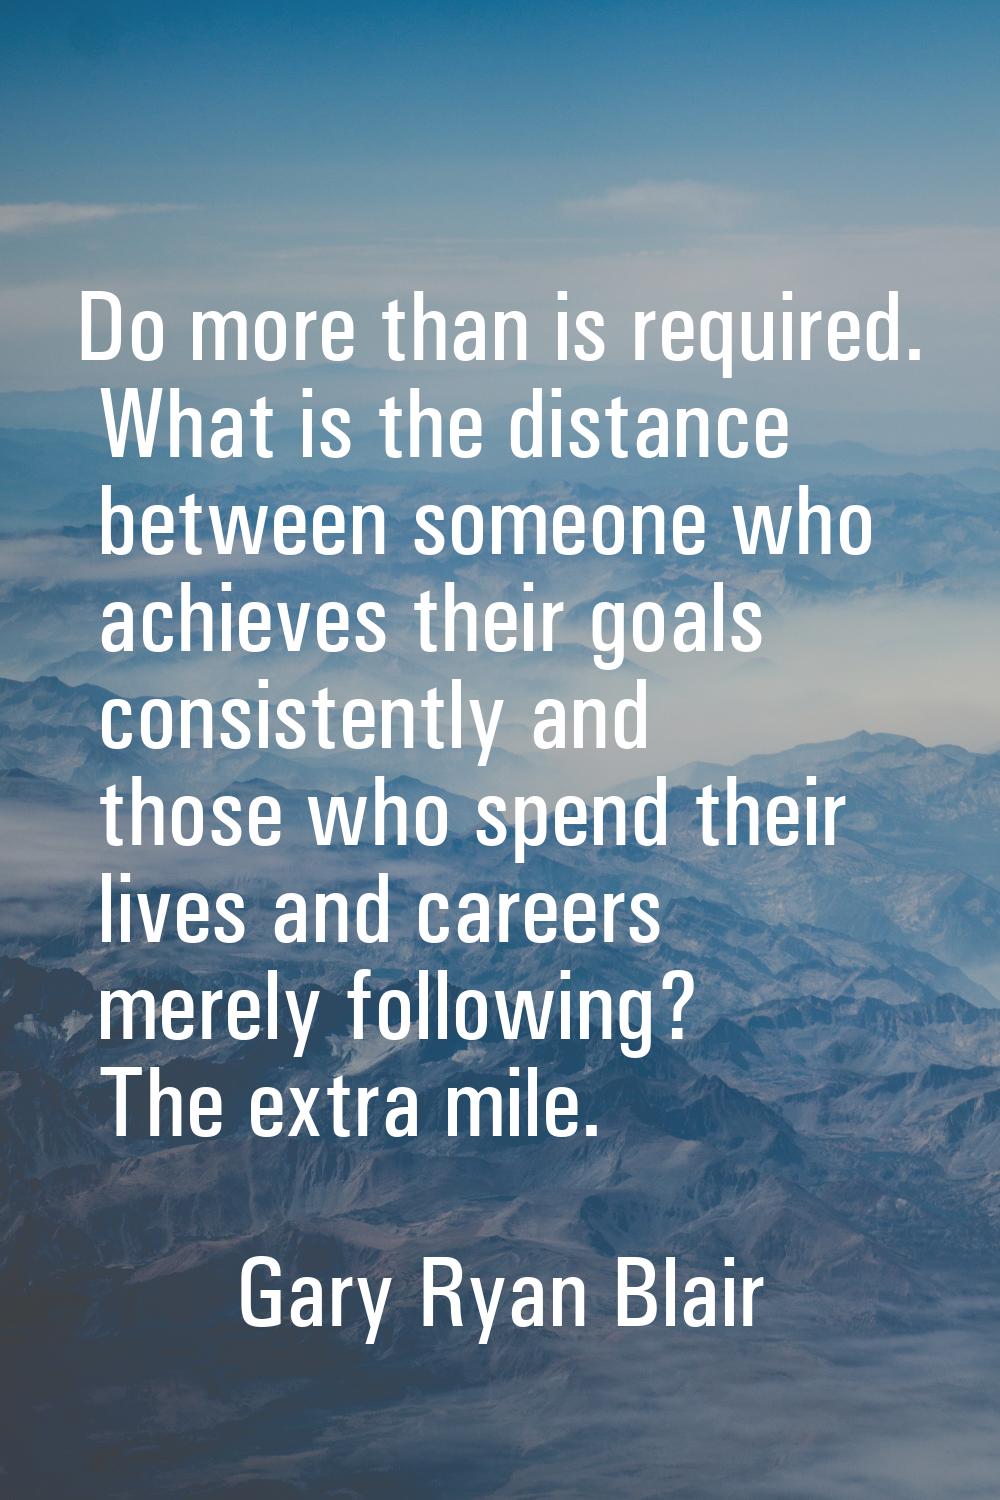 Do more than is required. What is the distance between someone who achieves their goals consistentl